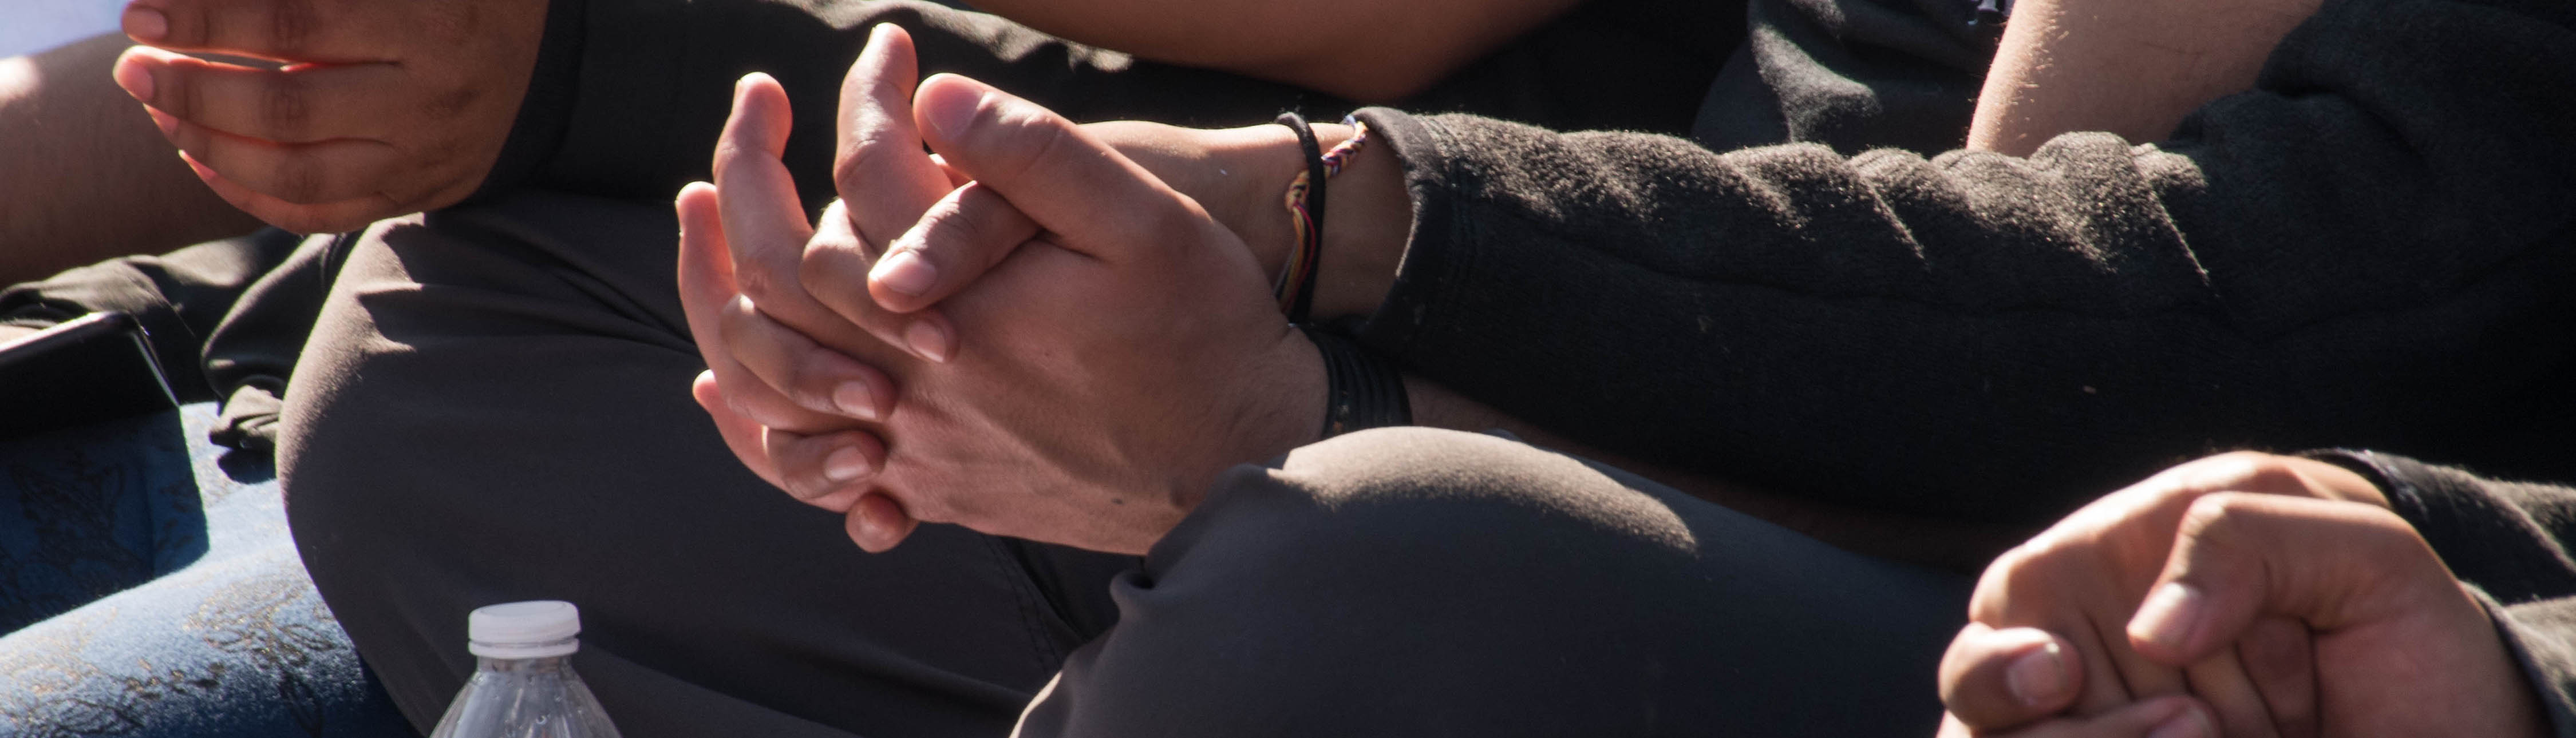 People holding hands, close up view of their hands together